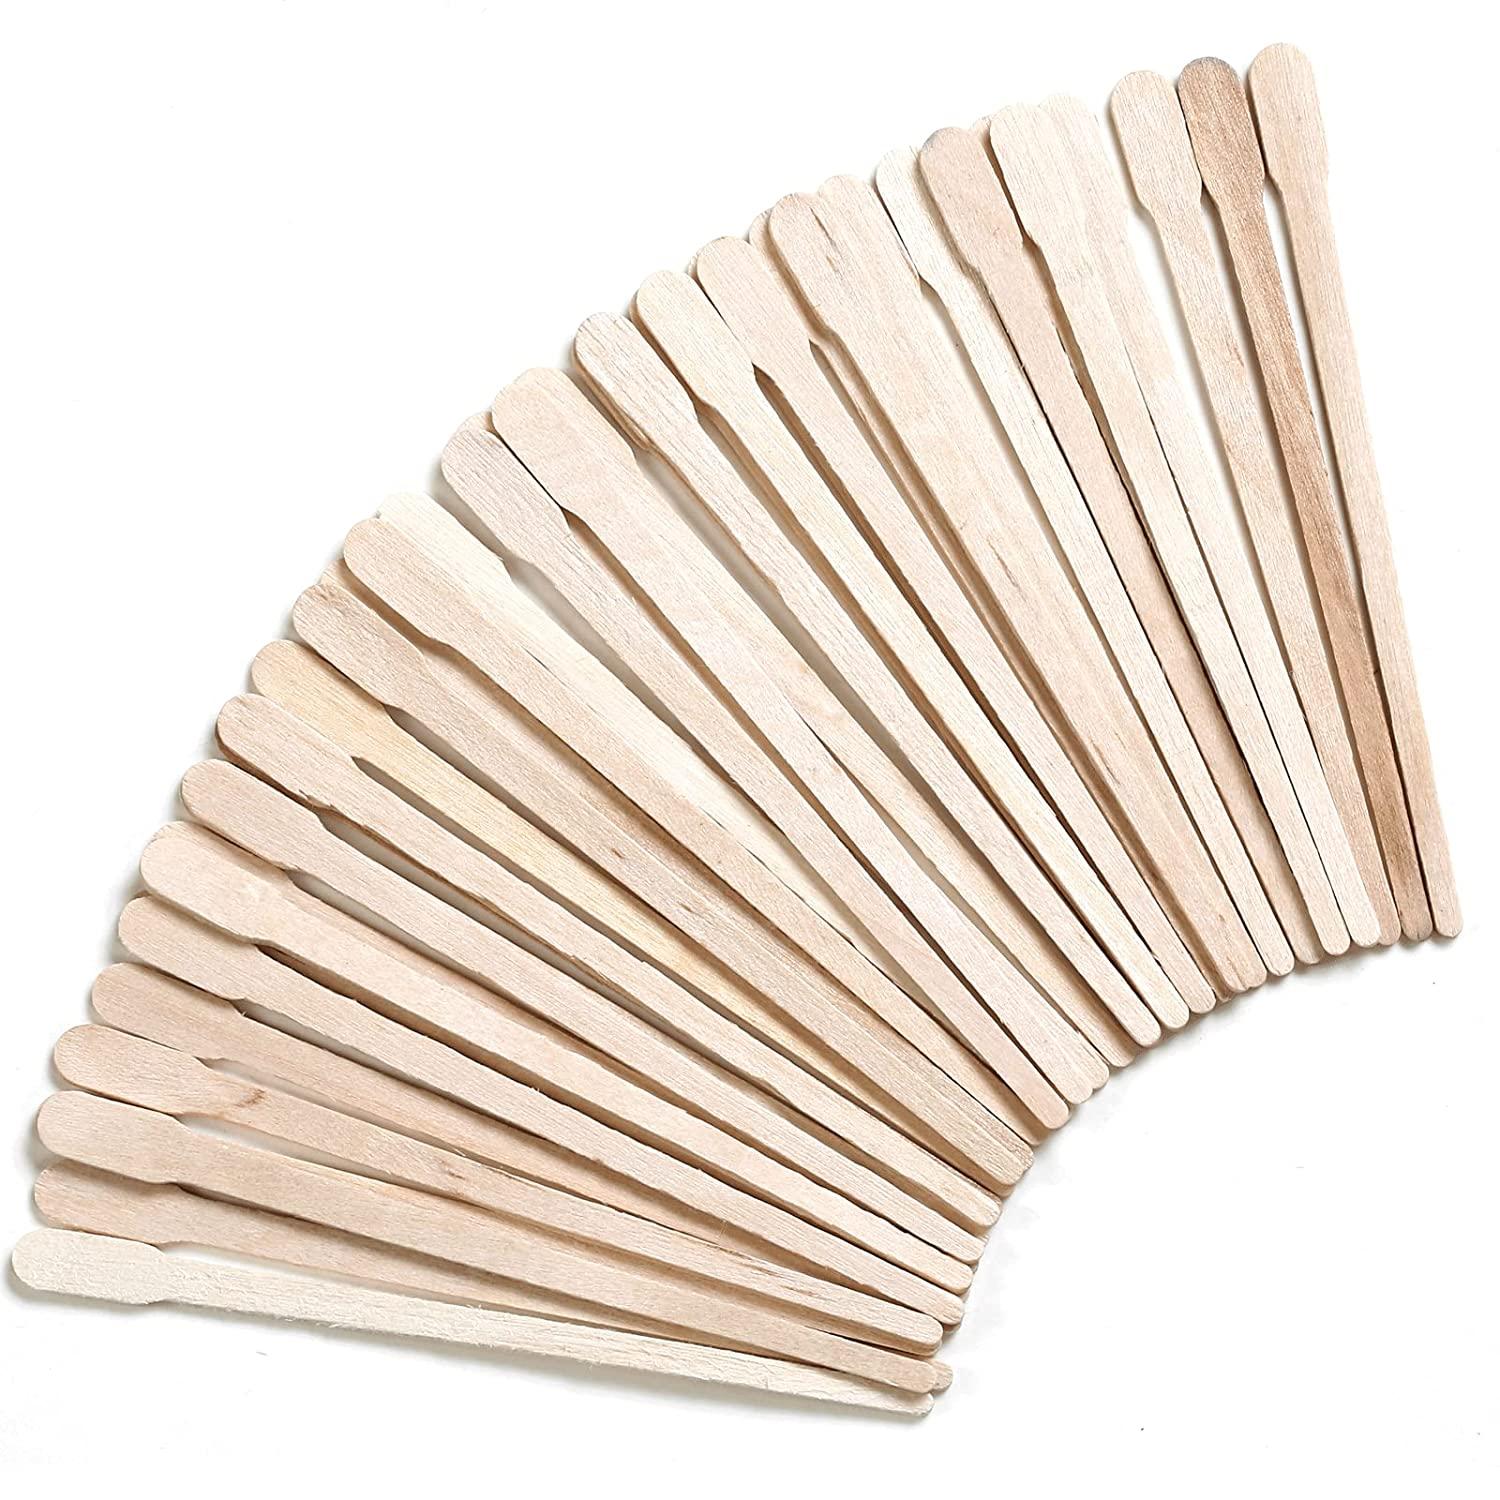 DecBlue 300 Pcs Wooden Wax Sticks 4 Styles Wood Waxing Spatulas Applicators  Hair Removal SML Sizes for Body Legs Facial or Wood Craft Sticks (300Pcs)